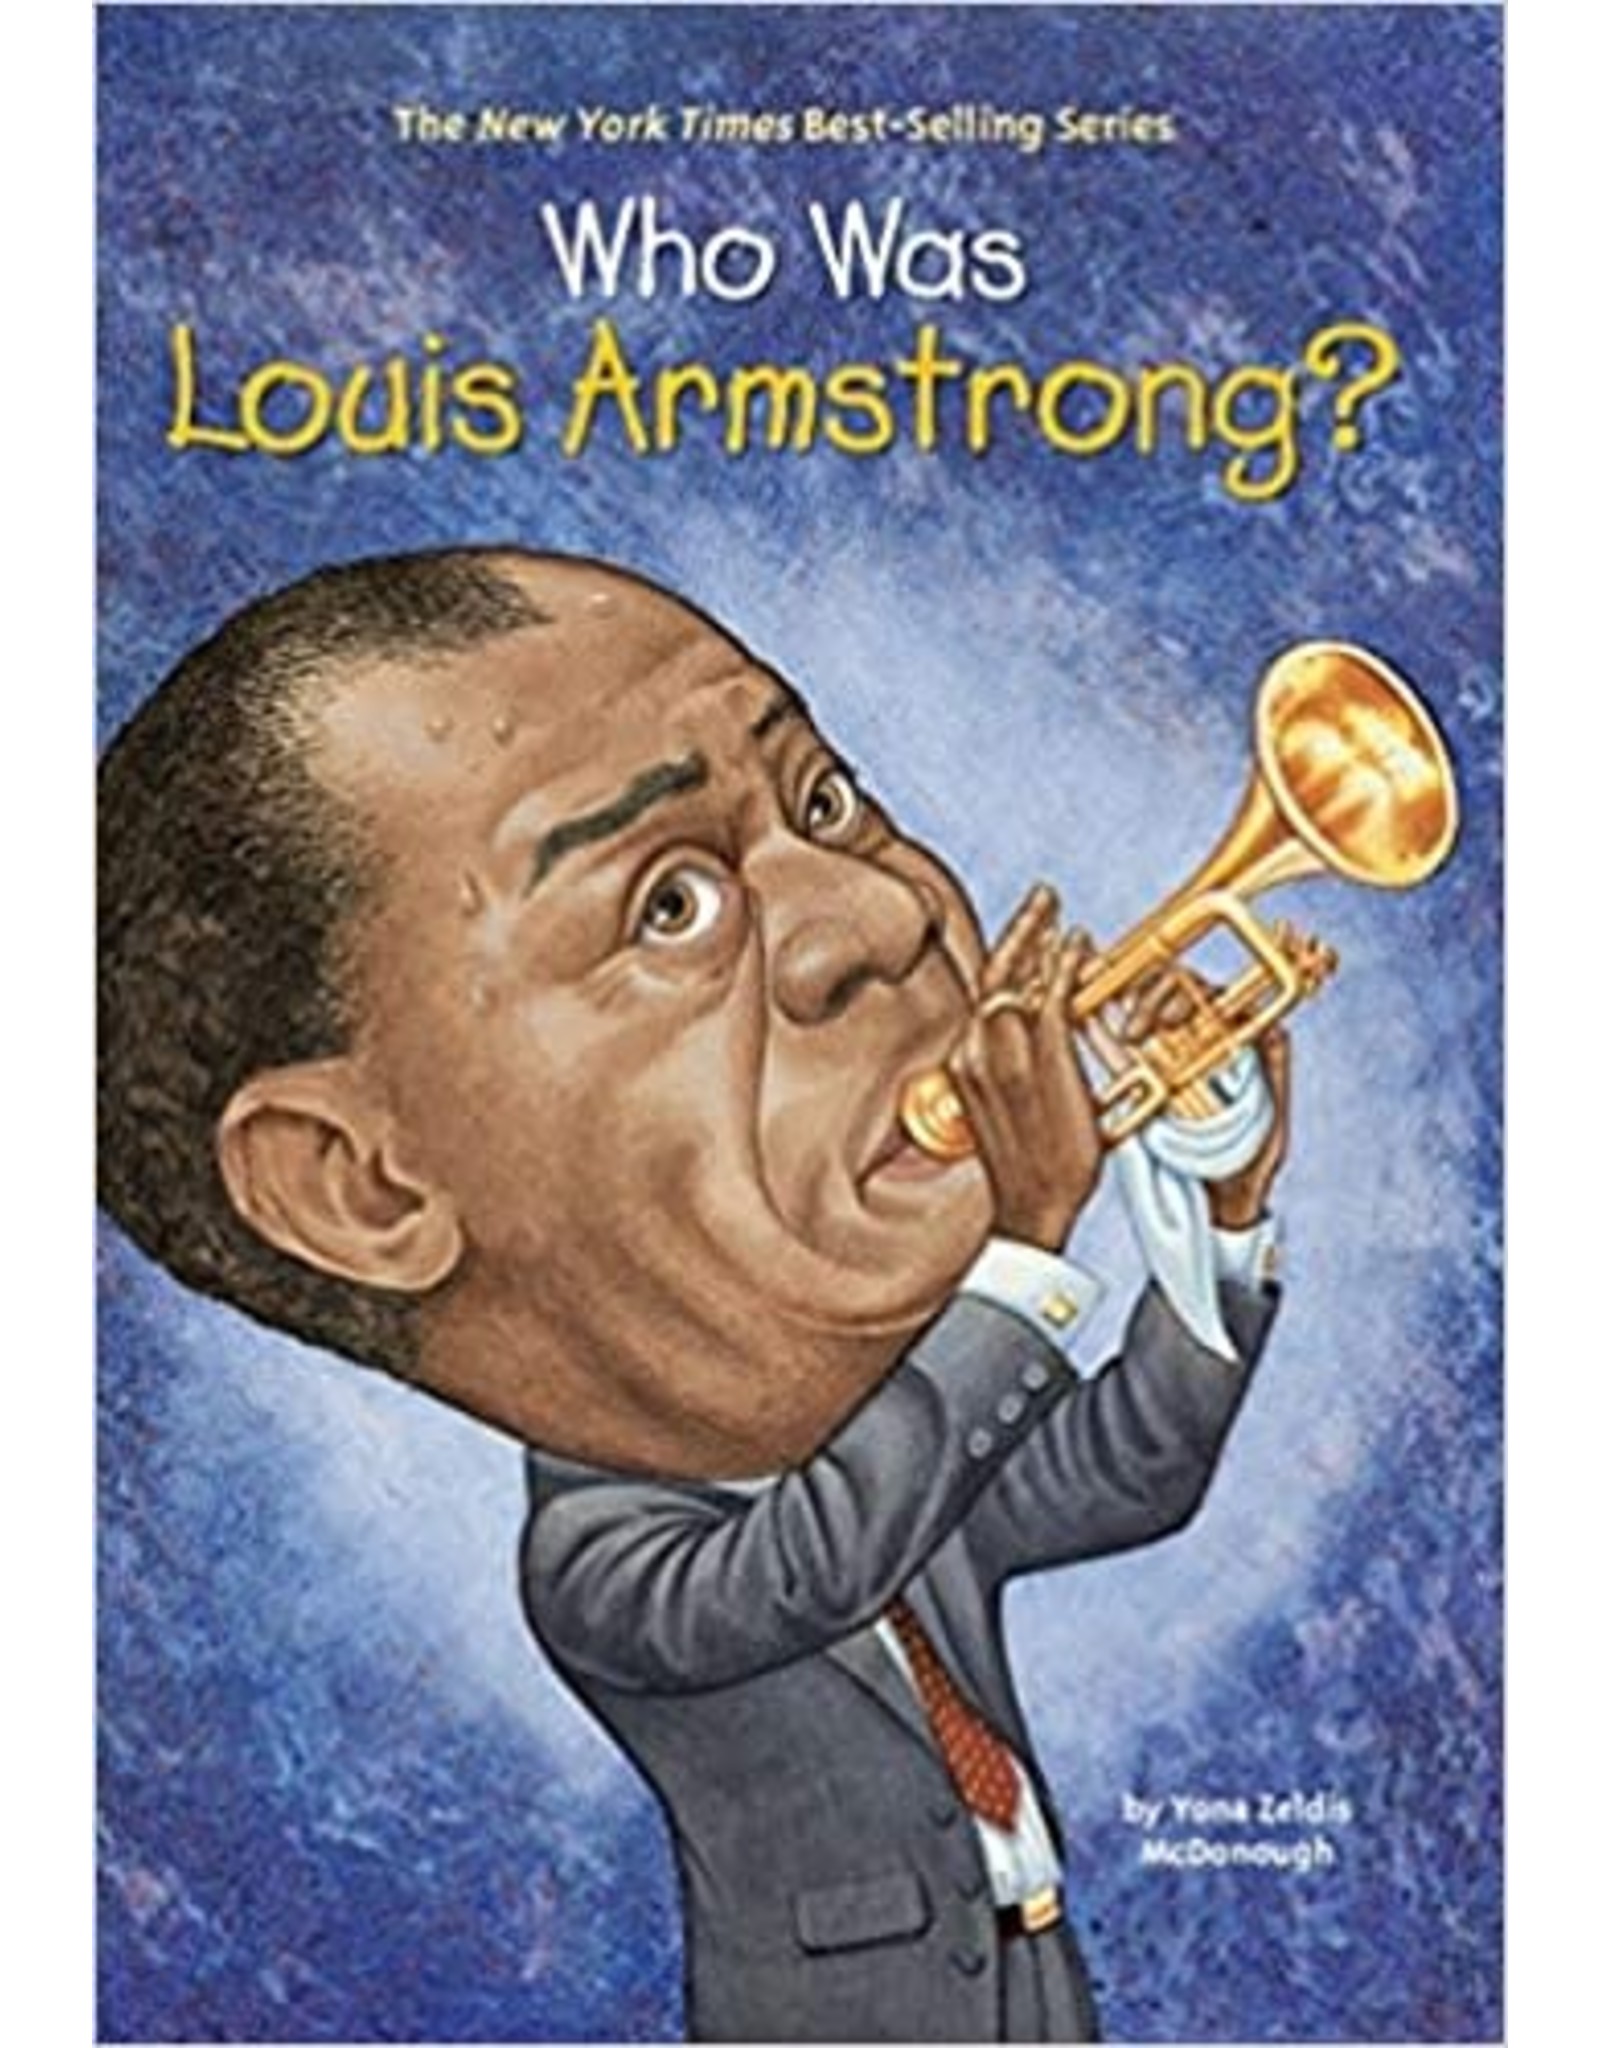 Who Was Louis Armstrong?